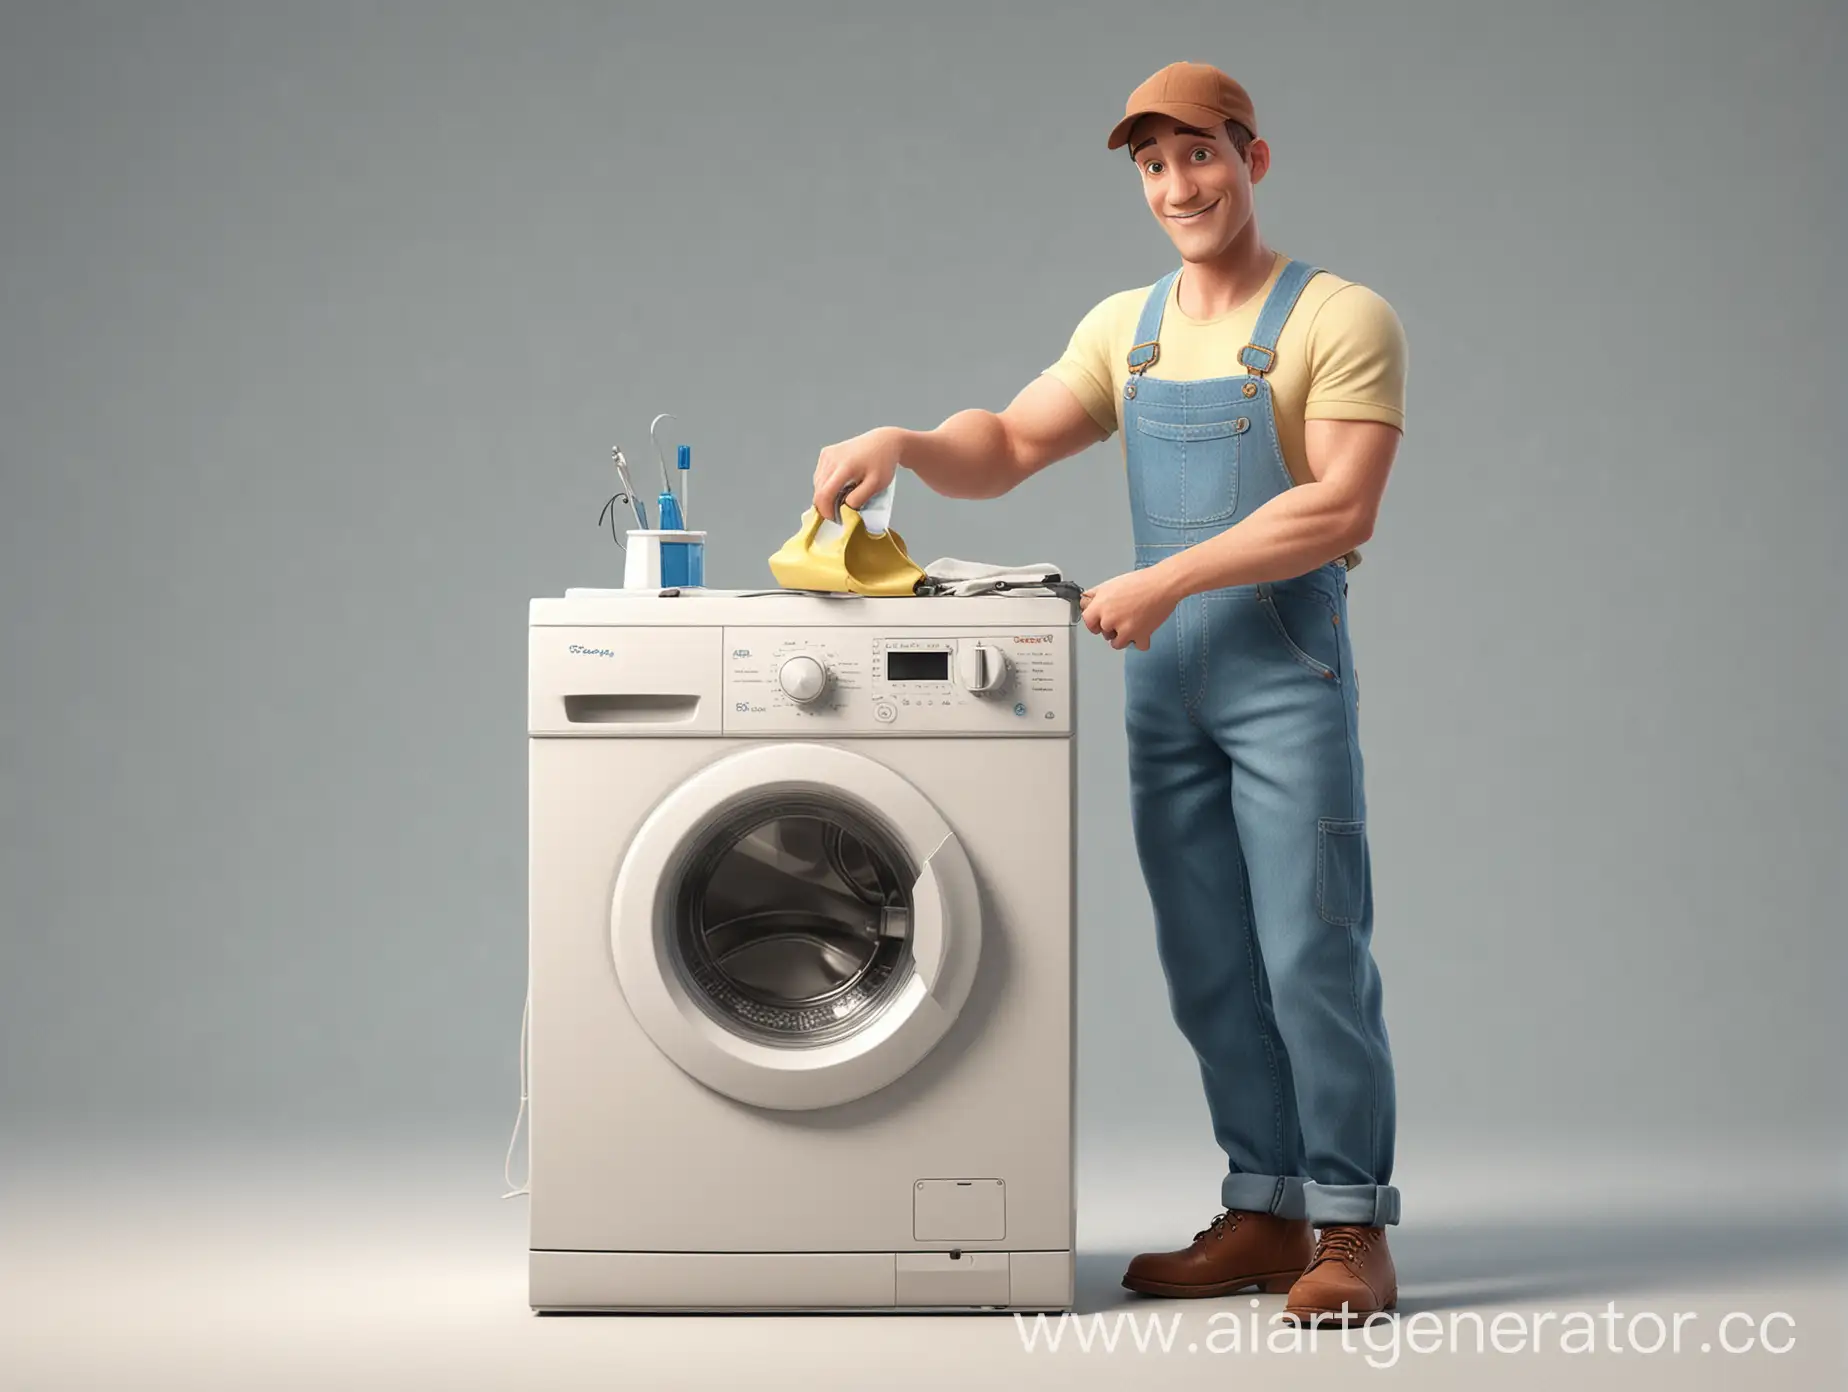 Positive prompt:

A Disney-style 1930s repairman, in a minimalist style with soft, rounded features, standing next to a washing machine and fixing it with tools. The repairman should be depicted as a separate object on a transparent background, with minimal details and using the same color palette as classic Disney cartoons.
Additional details:

The repairman should be wearing overalls, a cap, and a tool belt.
The washing machine should be a classic, top-loading model.
The tools should include a wrench, screwdriver, and pliers.
The overall style should be cheerful and optimistic, reminiscent of classic Disney animation.
<img src="prompt: A Disney-style 1930s repairman, in a minimalist style with soft, rounded features, standing next to a washing machine and fixing it with tools. The repairman should be depicted as a separate object on a transparent background, with minimal details and using the same color palette as classic Disney cartoons. --no harsh lines or sharp edges --no realistic details --no colors outside the classic Disney color palette --no suggestive or offensive content">
